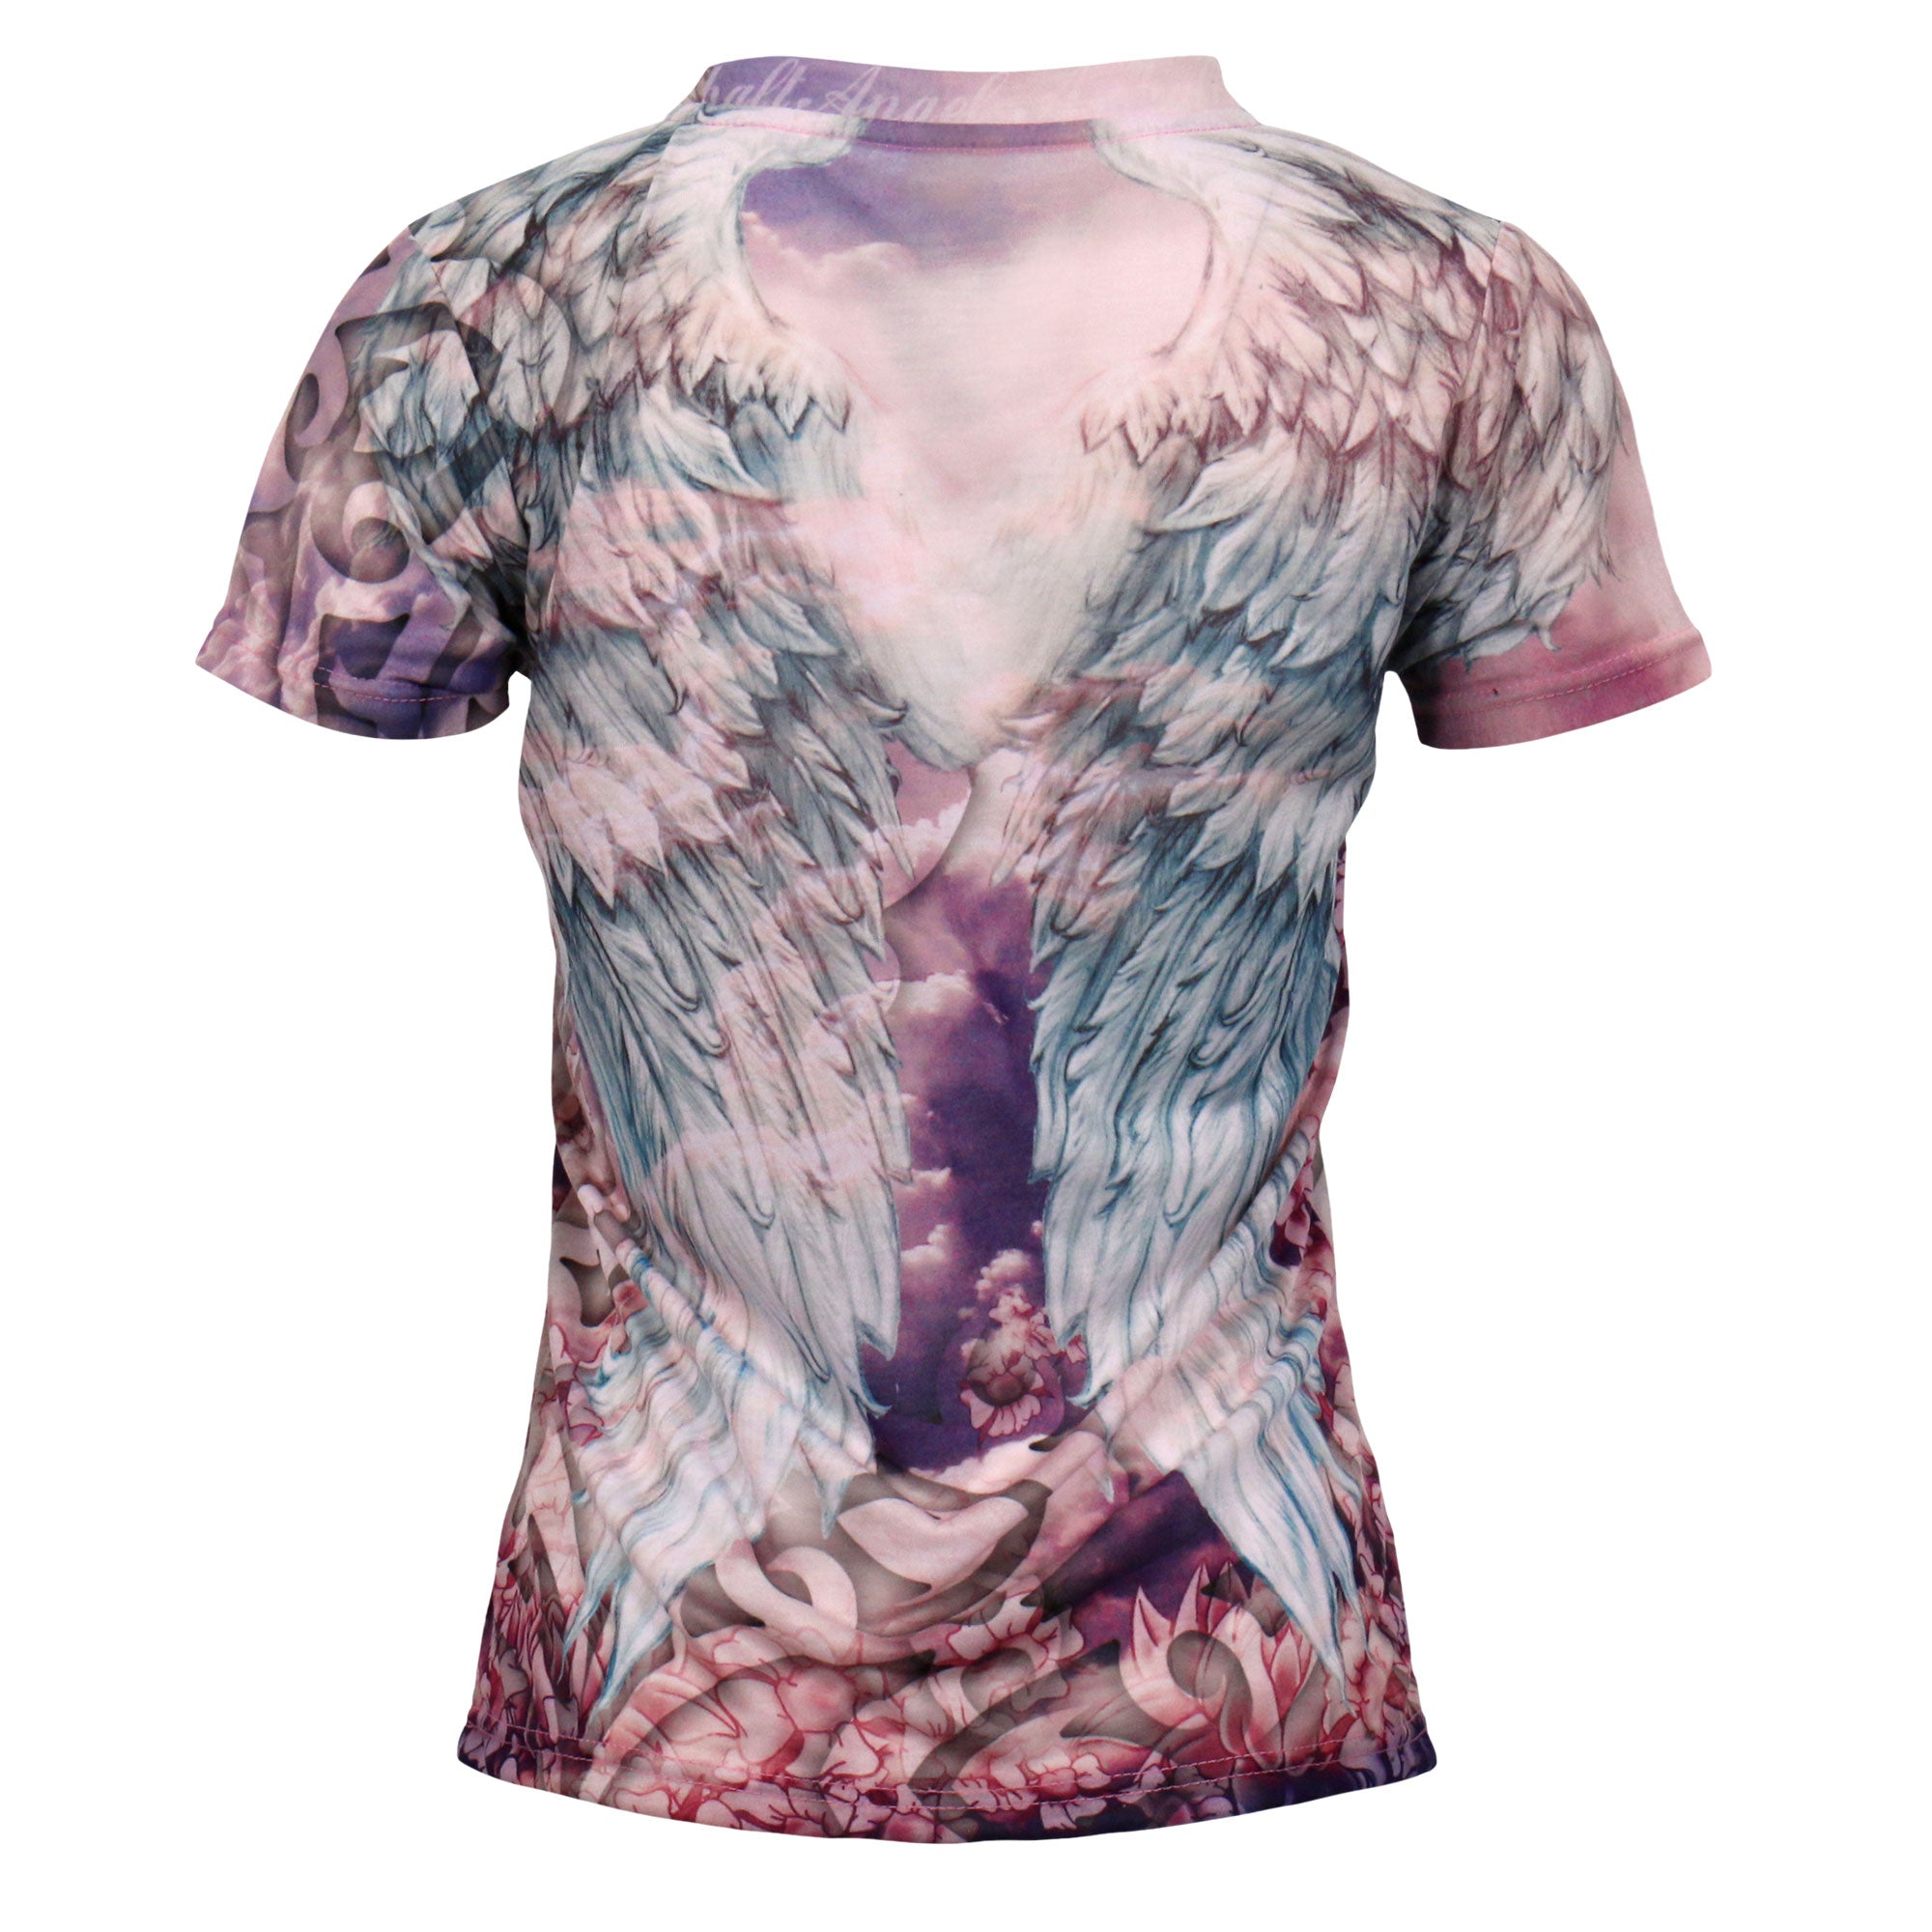 Hot Leathers Ladies Angel Wings Pink Fitted 3D All Over Printed T-Shirt GLS1001